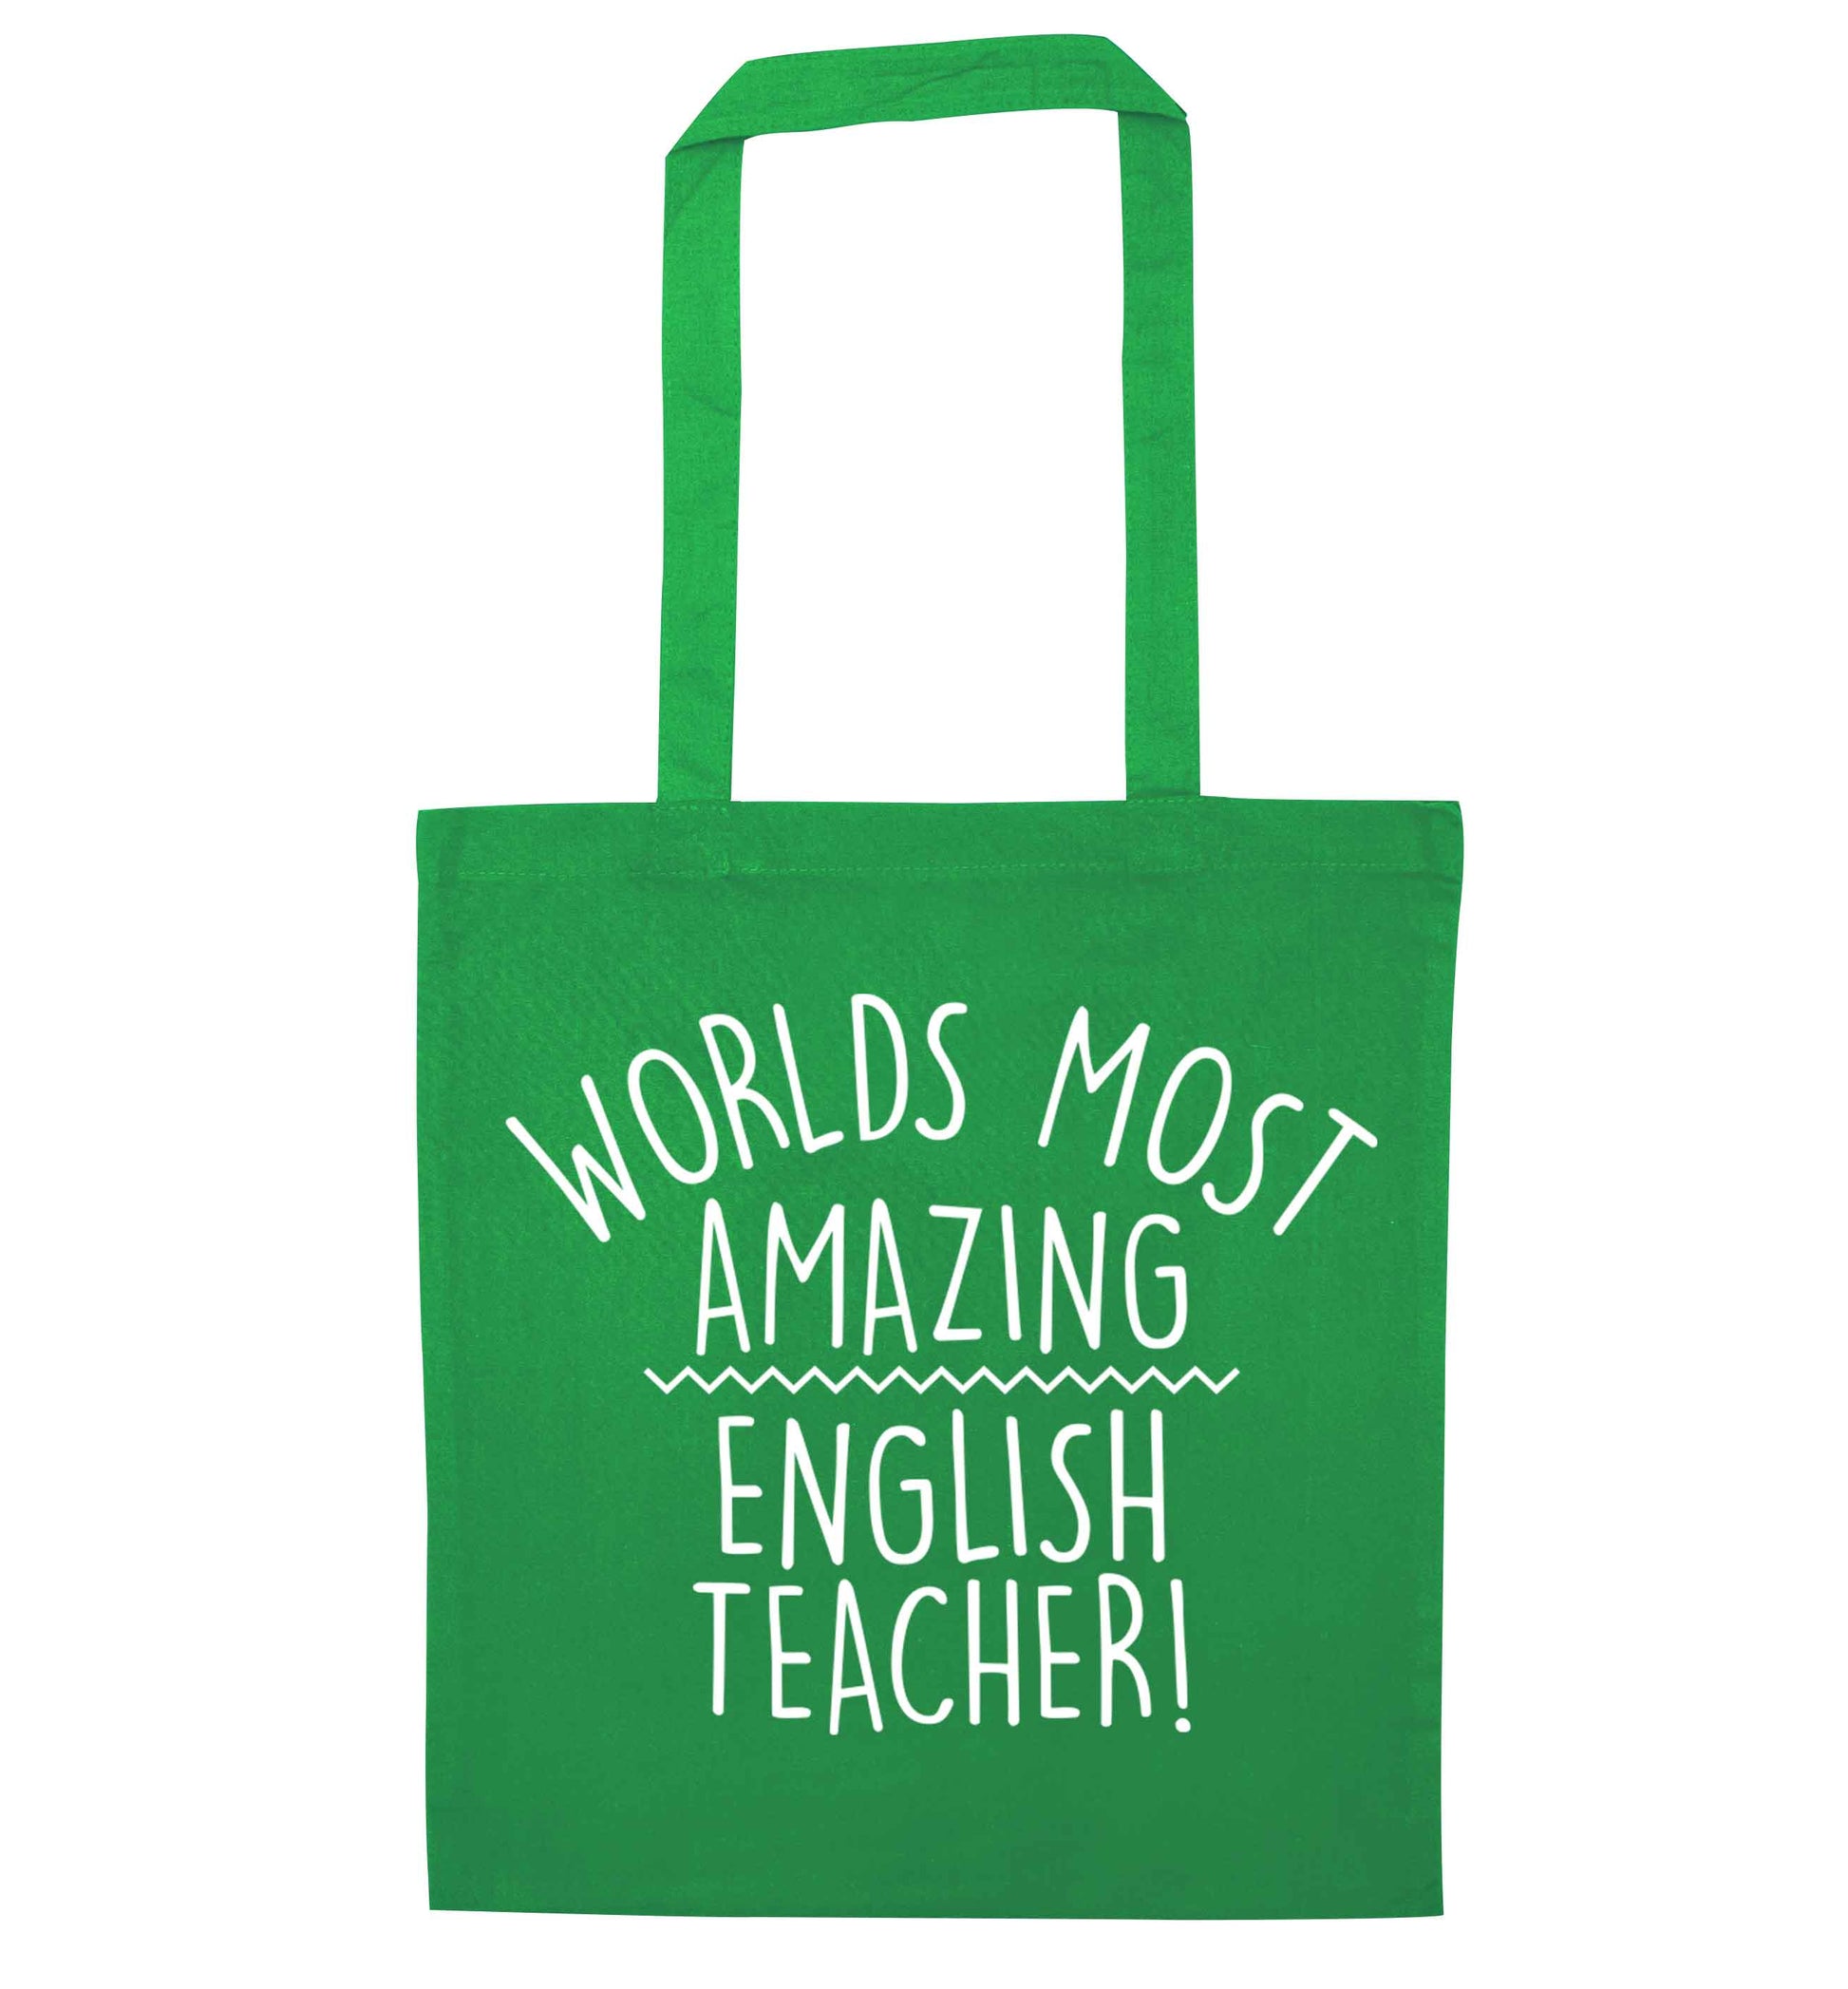 Worlds most amazing English teacher green tote bag